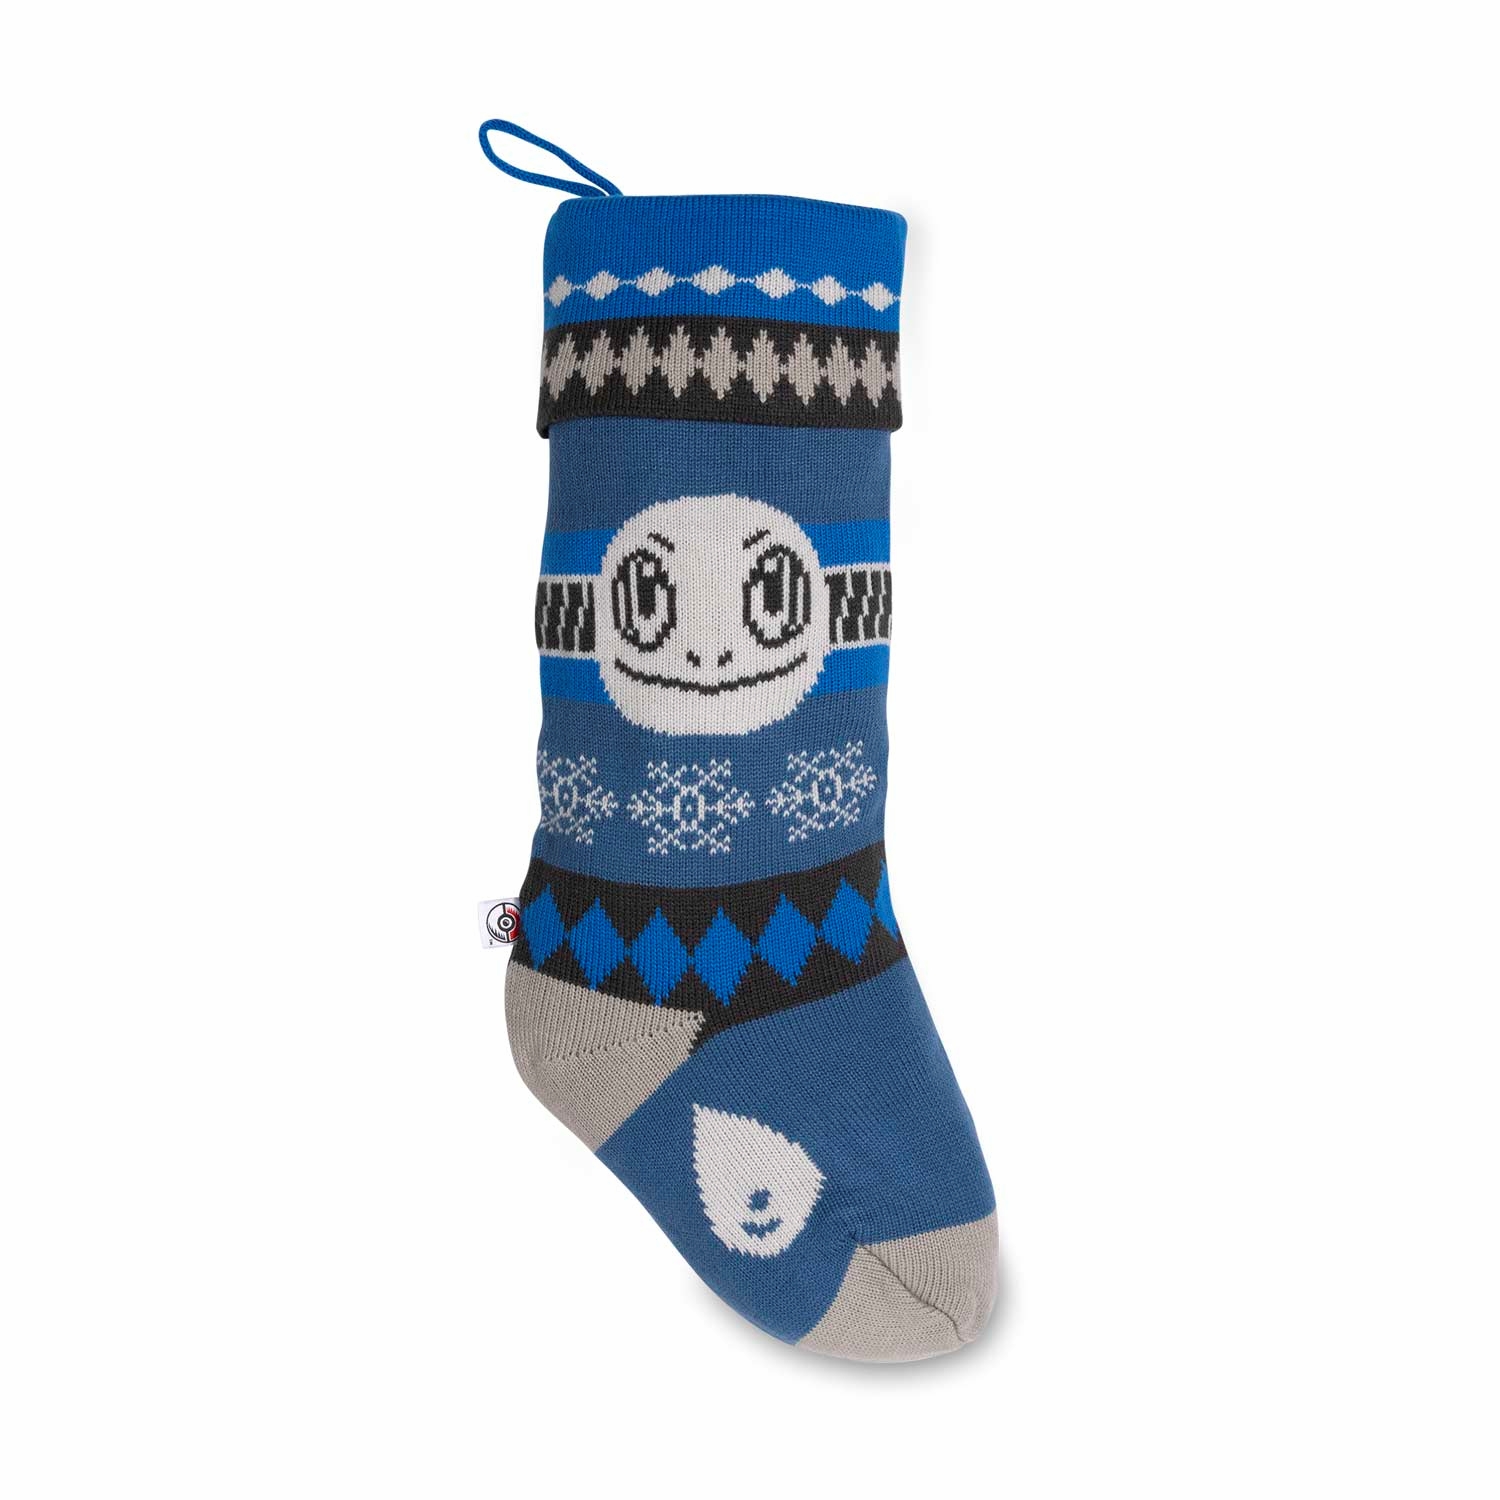 Pokemon_Holiday_Home_Stocking_(Squirtle)_Product_Image.jpg